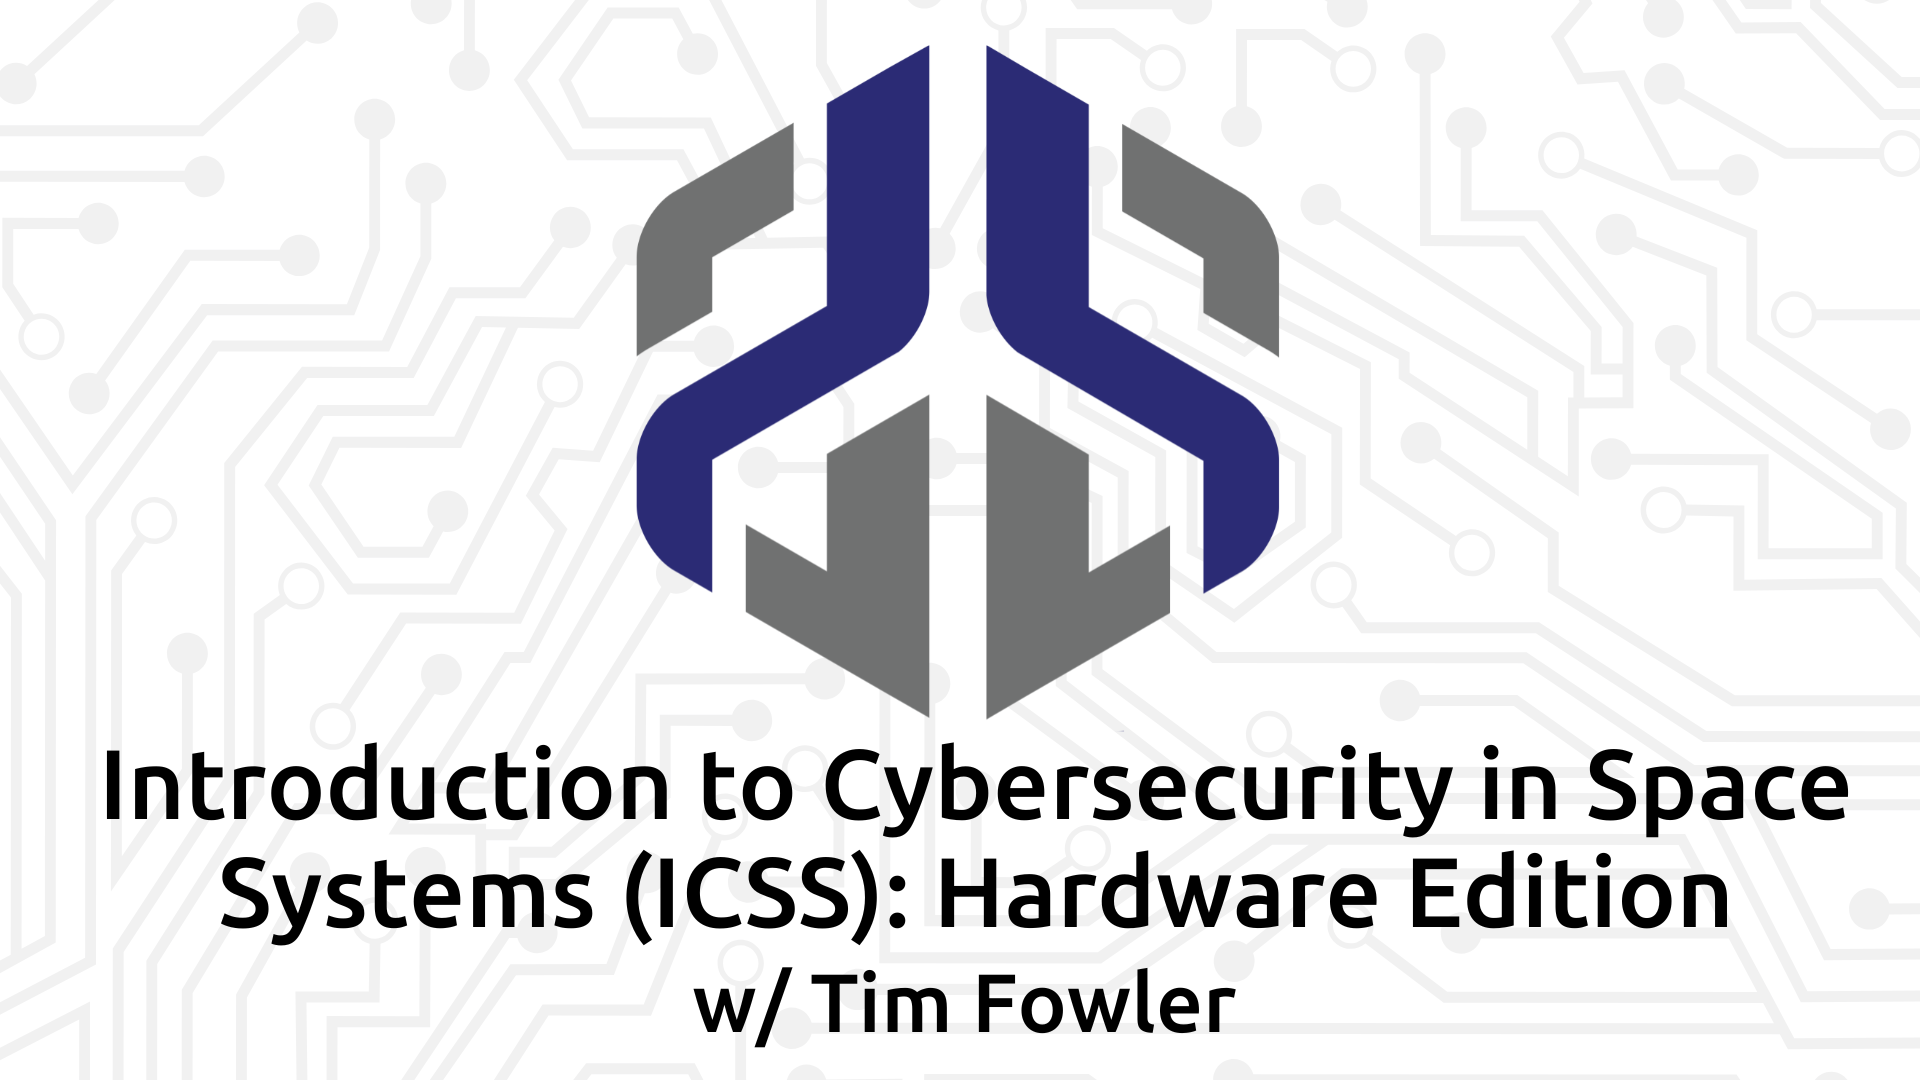 Introduction-to-Cybersecurity-in-Space Systems ICSS Hardware Edition